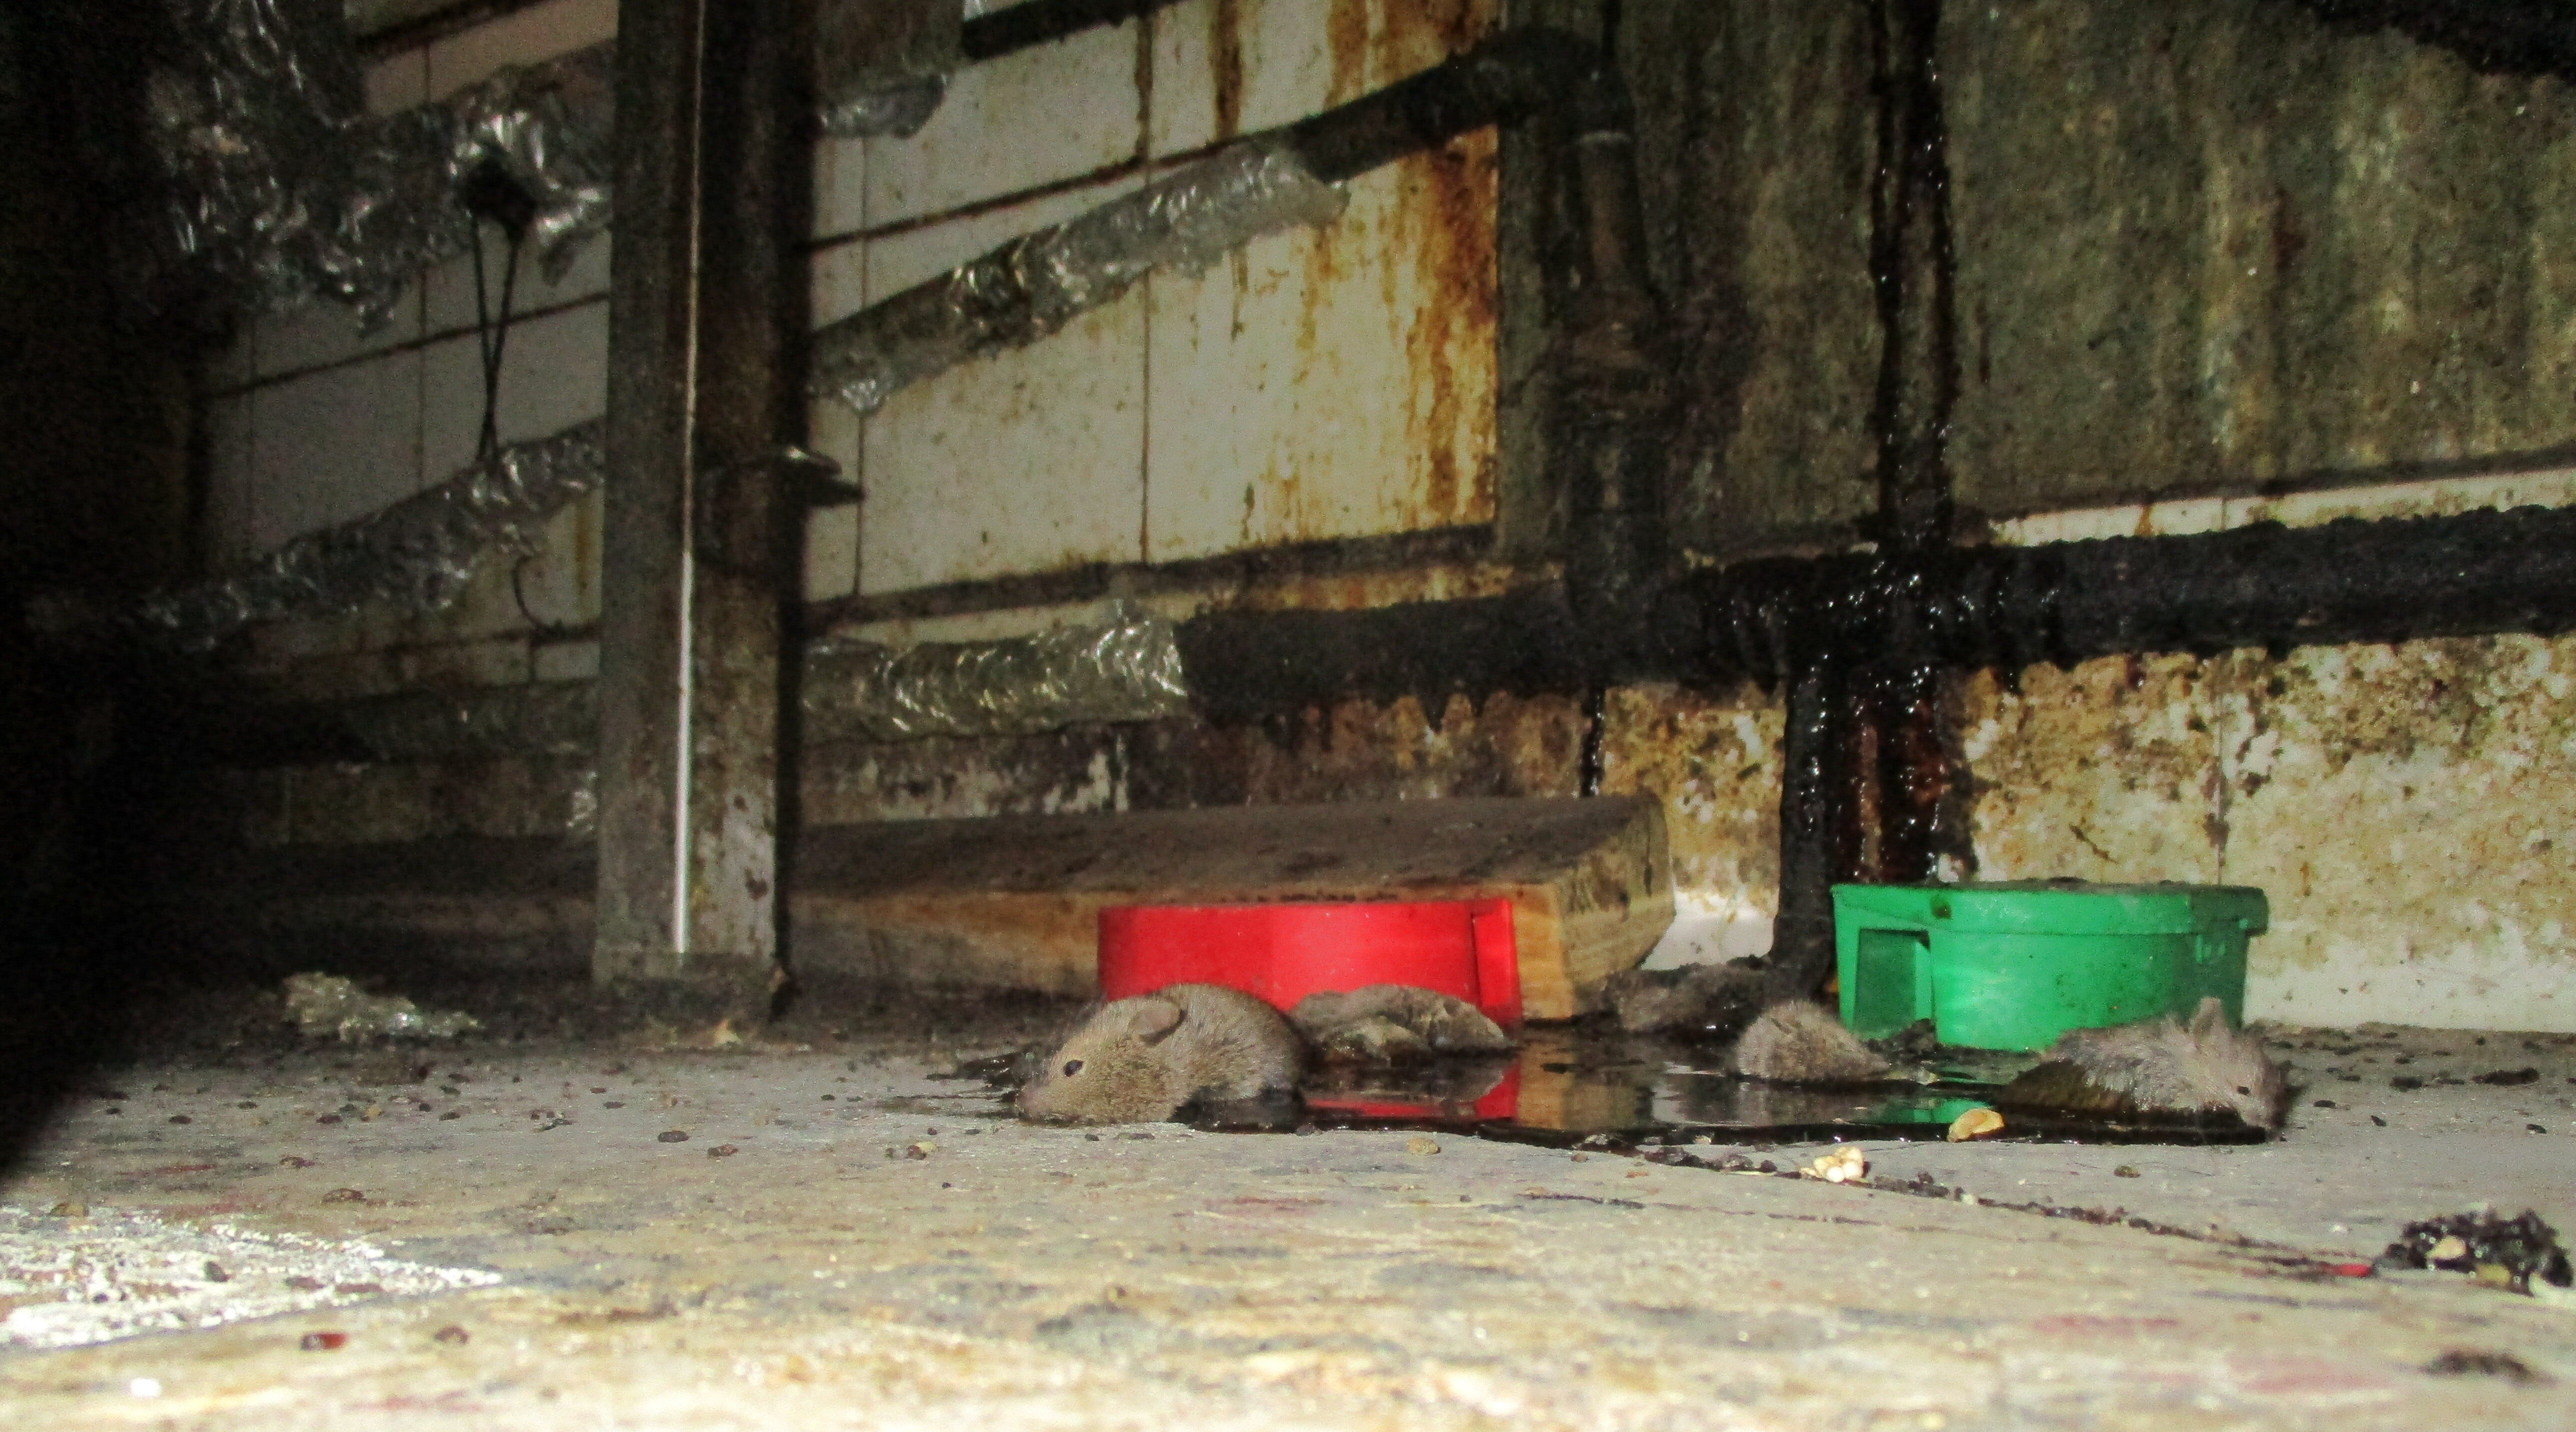 Restaurant owner ordered to pay £30,000 after inspectors found dead mice and rotting food 